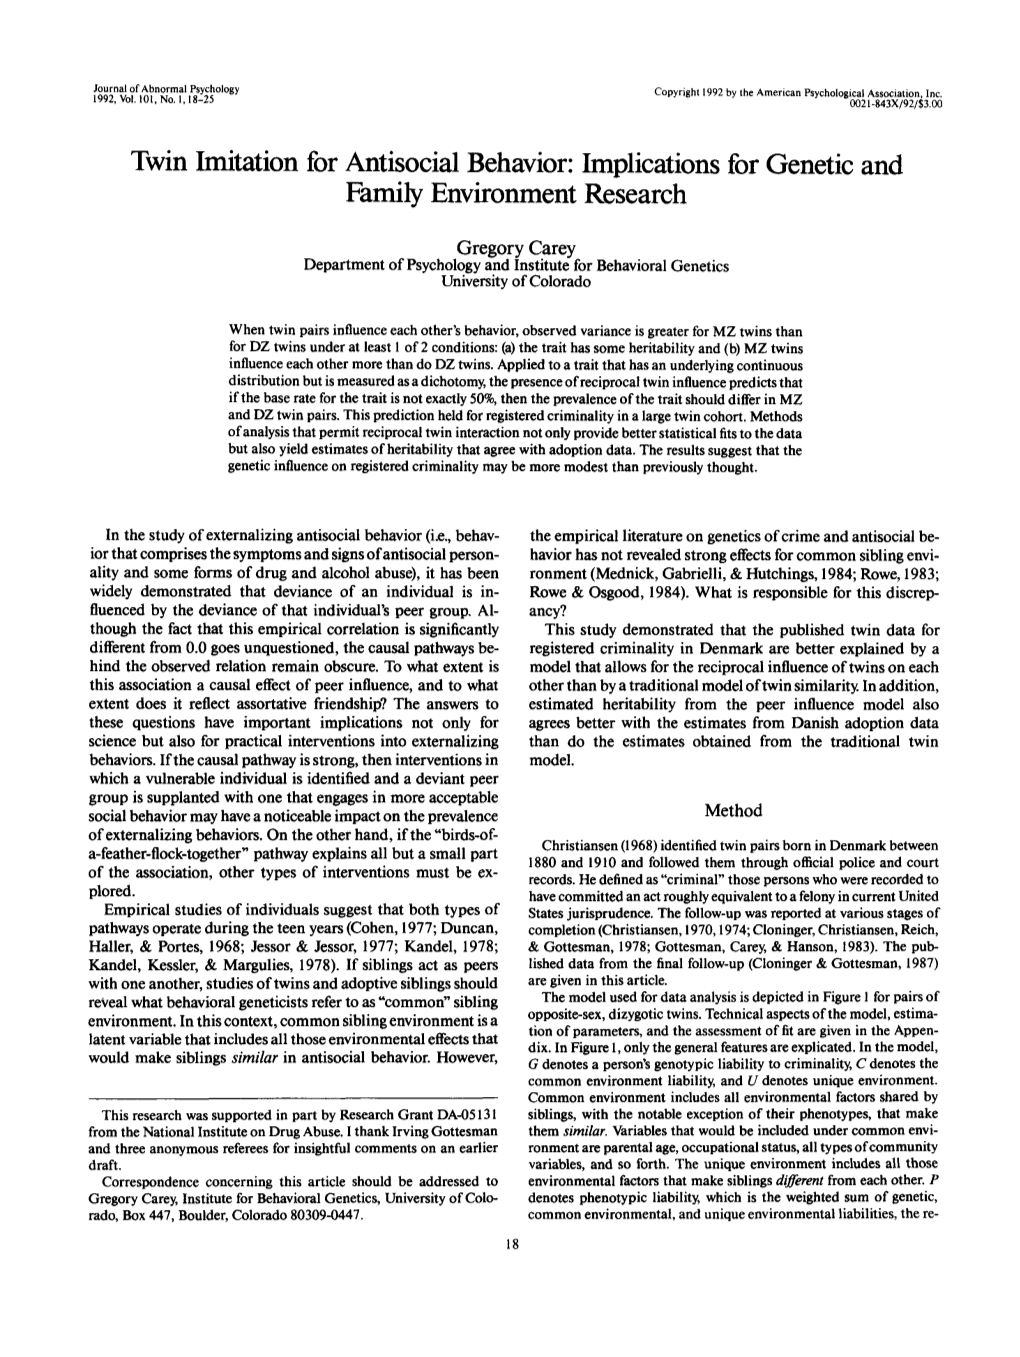 Twin Imitation for Antisocial Behavior: Implications for Genetic and Family Environment Research